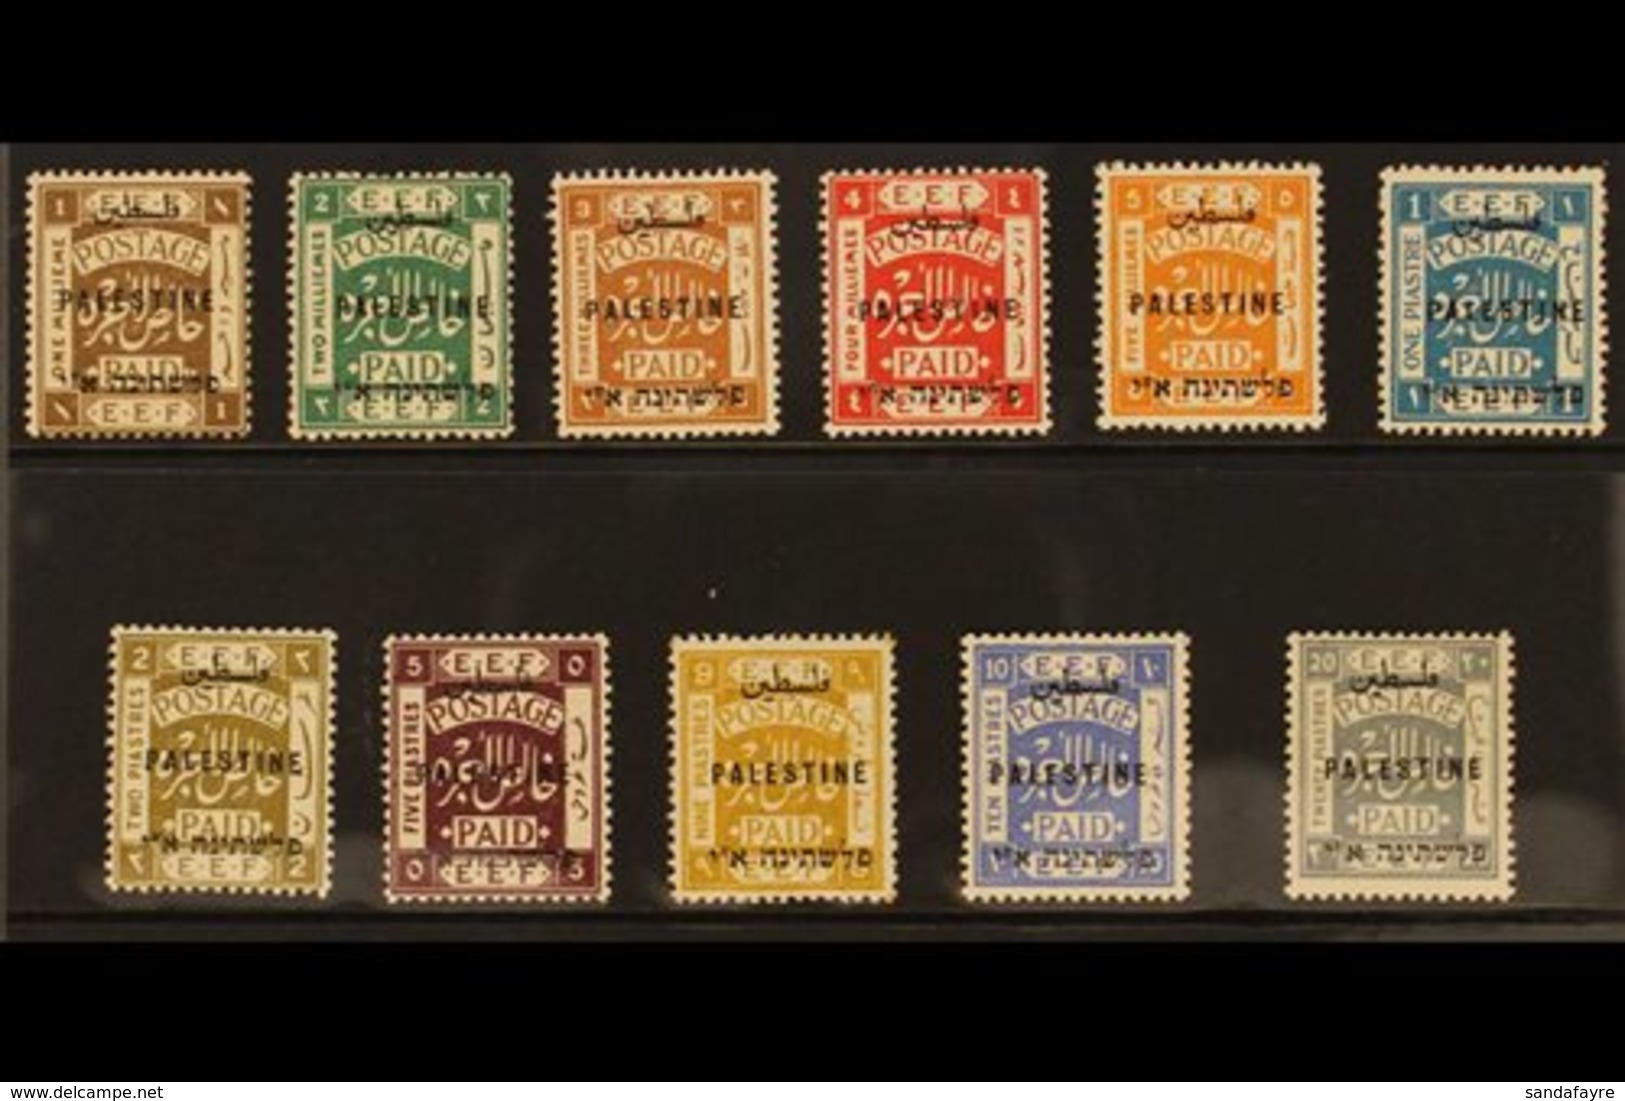 1921 Complete Set, Perf 15 X 14, Ovptd Type 7 (sans-serif Letters), SG 60/70, Very Fine Mint. (11 Stamps) For More Image - Palästina